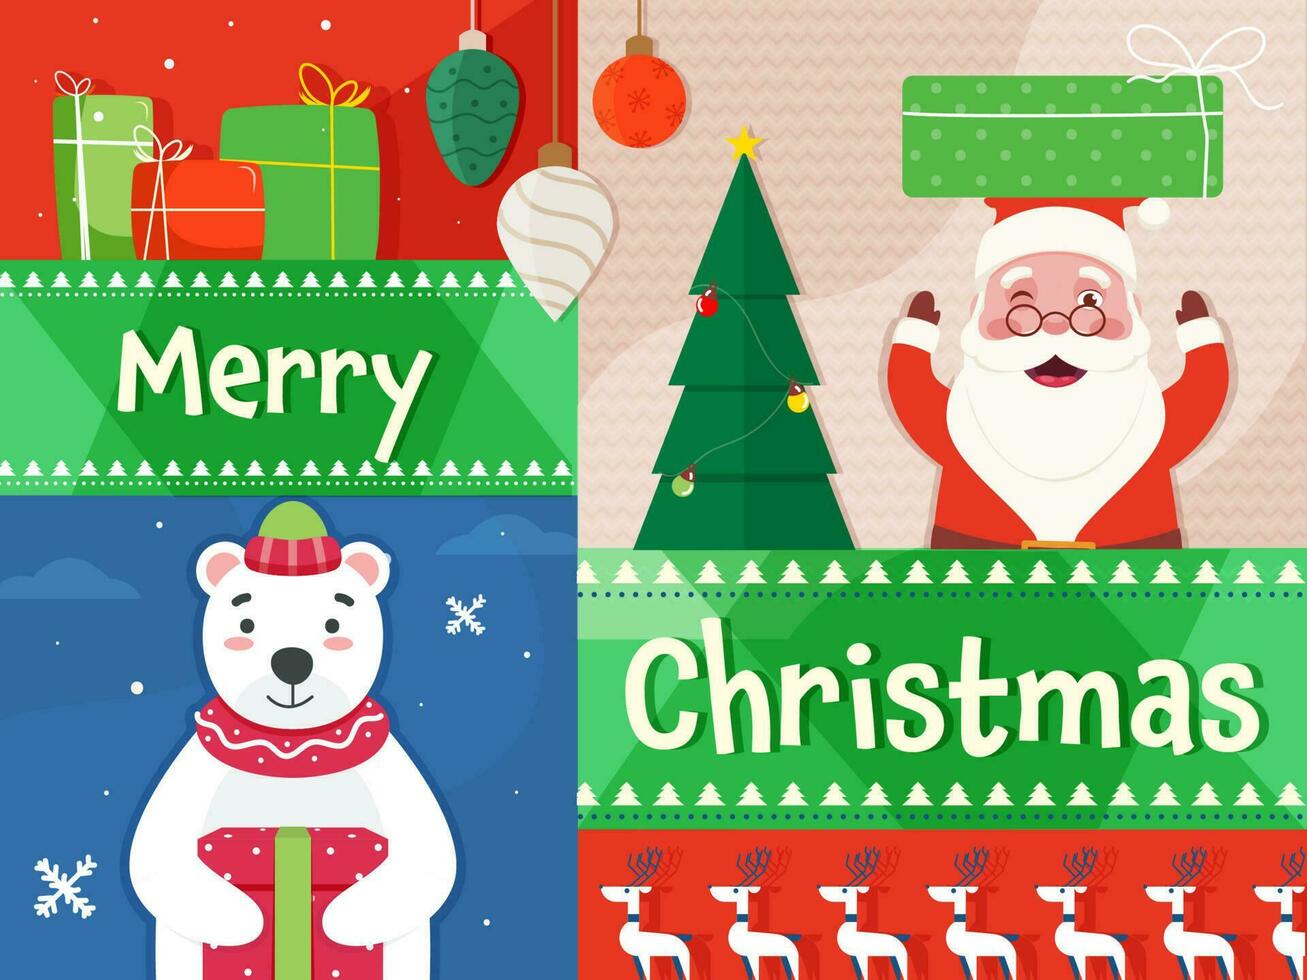 Merry Christmas Celebration Background With Santa Clause And Polar Beer Character. vector